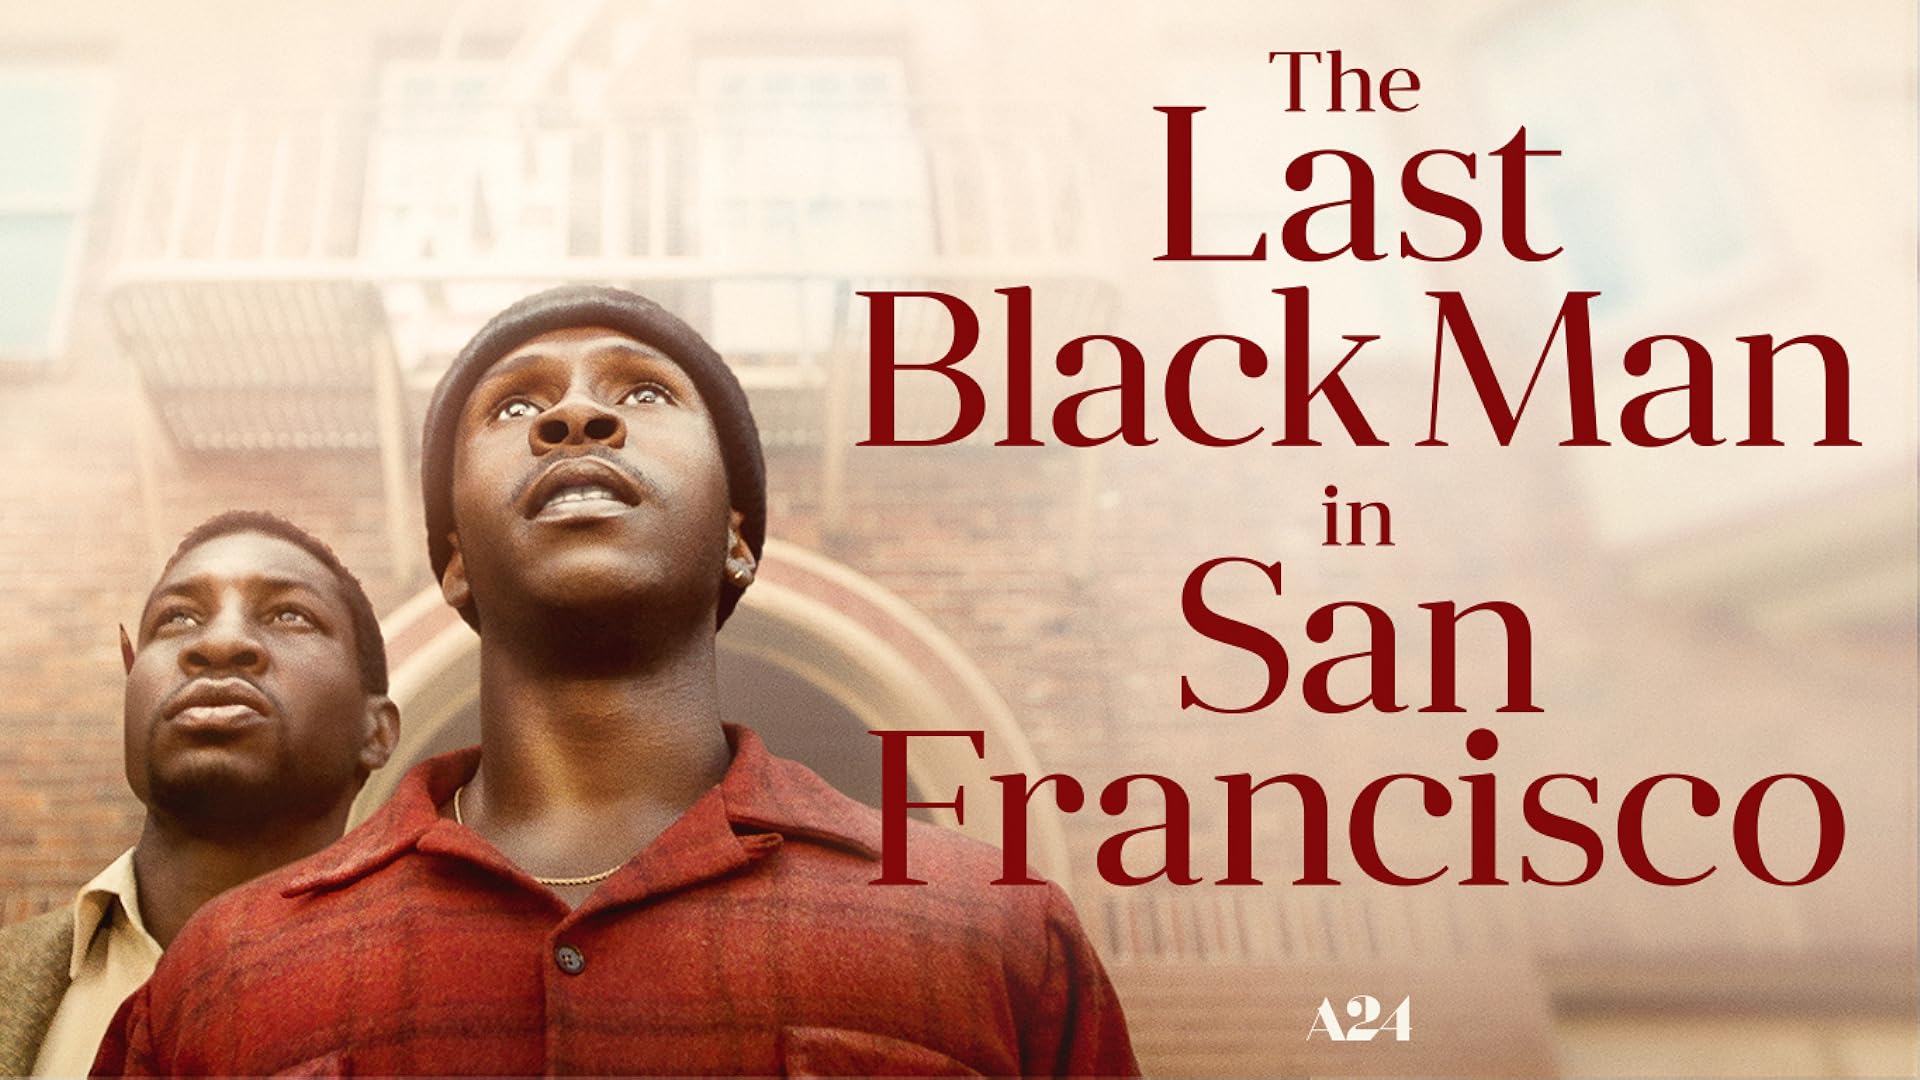 43-facts-about-the-movie-the-last-black-man-in-san-francisco